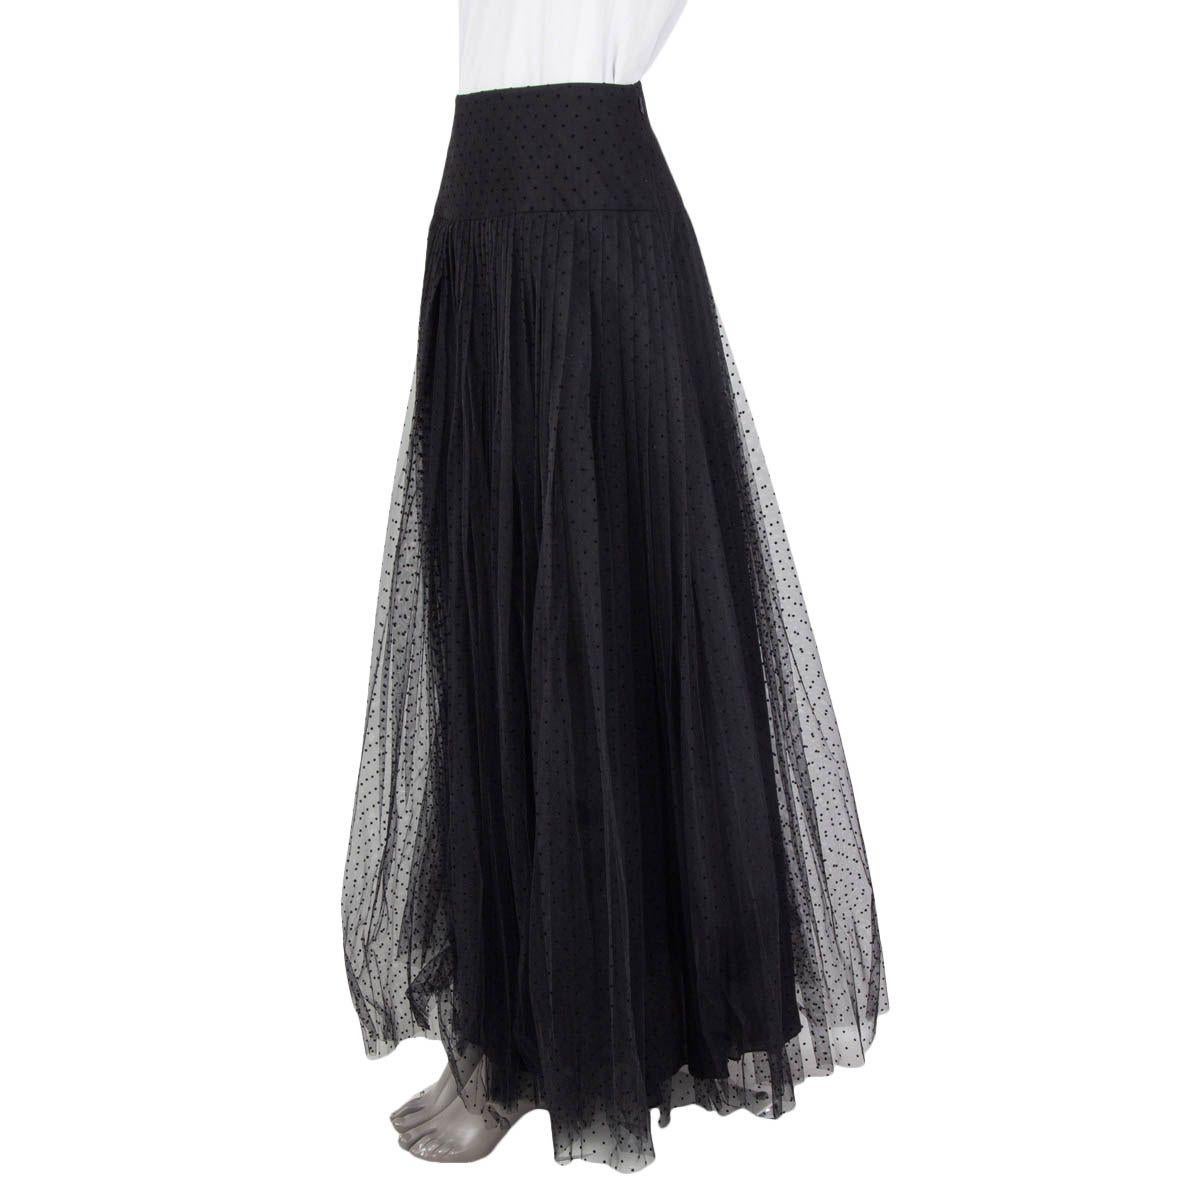 100% authentic Christian Dior 2020 pleated dotted tulle midi skirt in black polyamide (100%). Opens with a concealed zipper and a hook at the side. Lined in black silk (100%). Has a tear at the hemline otherwise in excellent